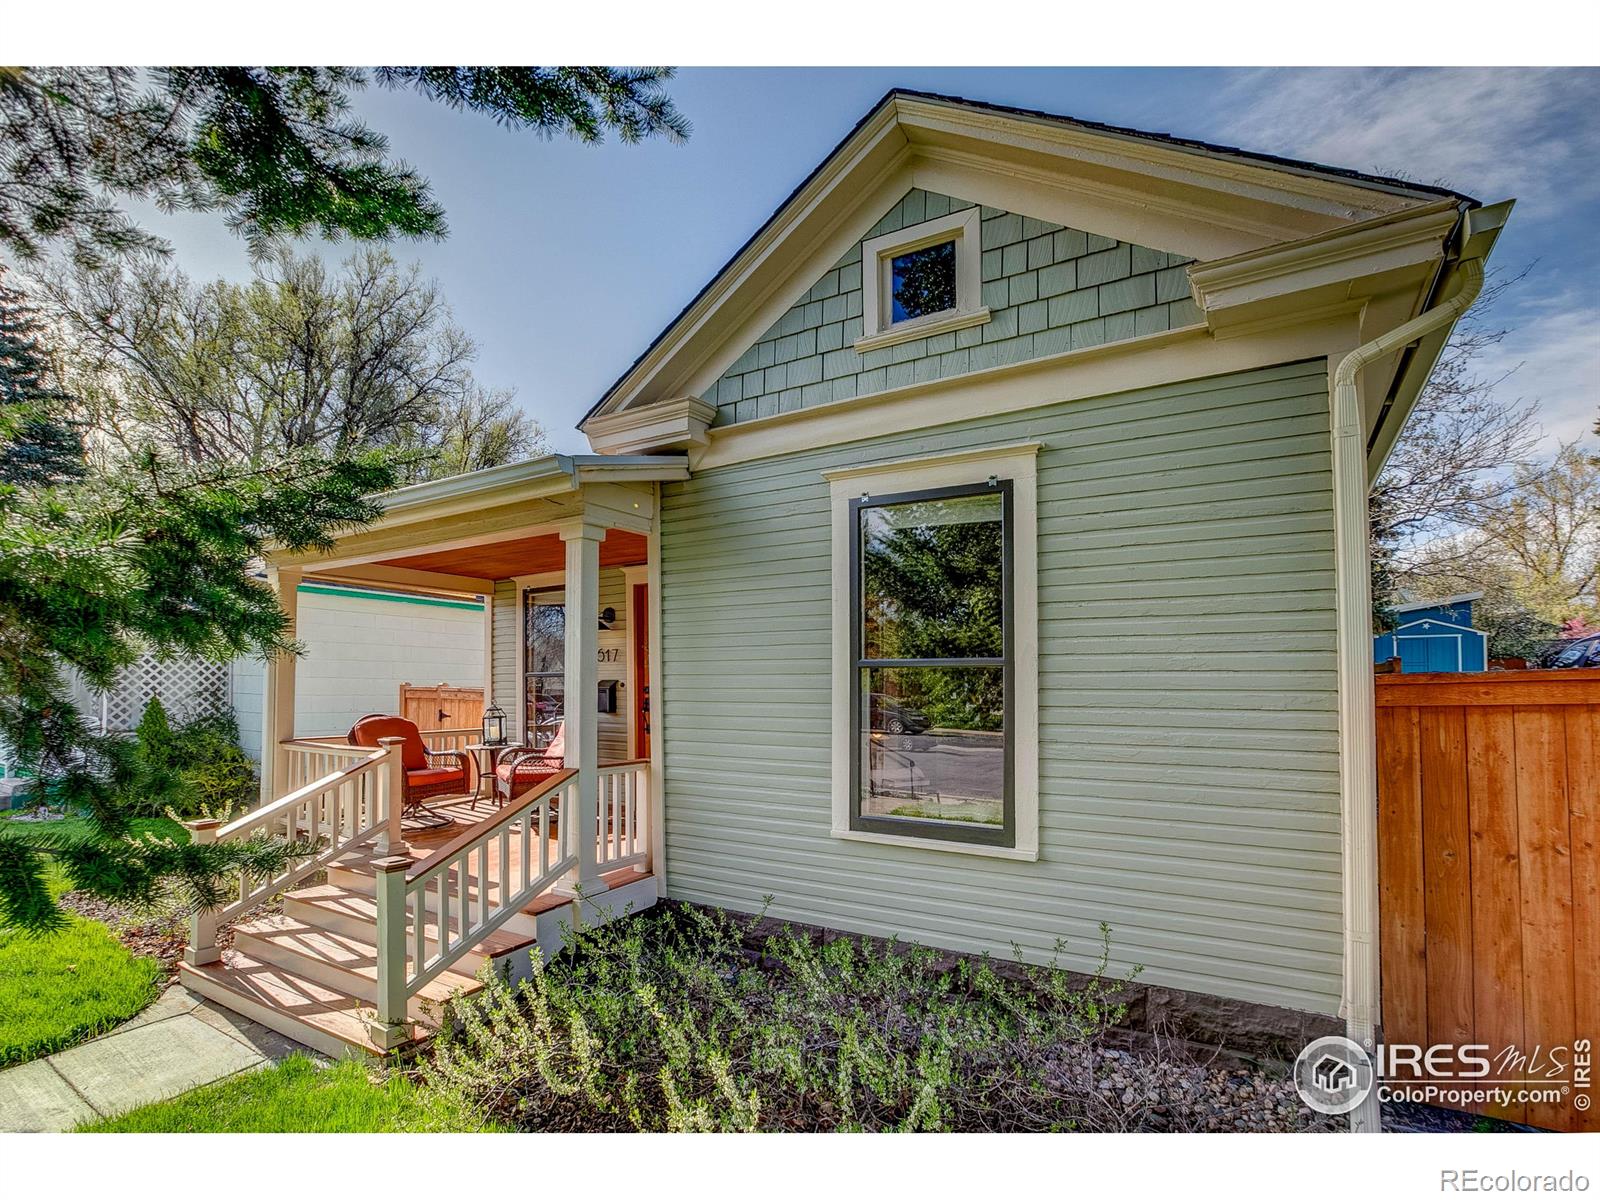 Report Image for 617  Maple Street,Fort Collins, Colorado